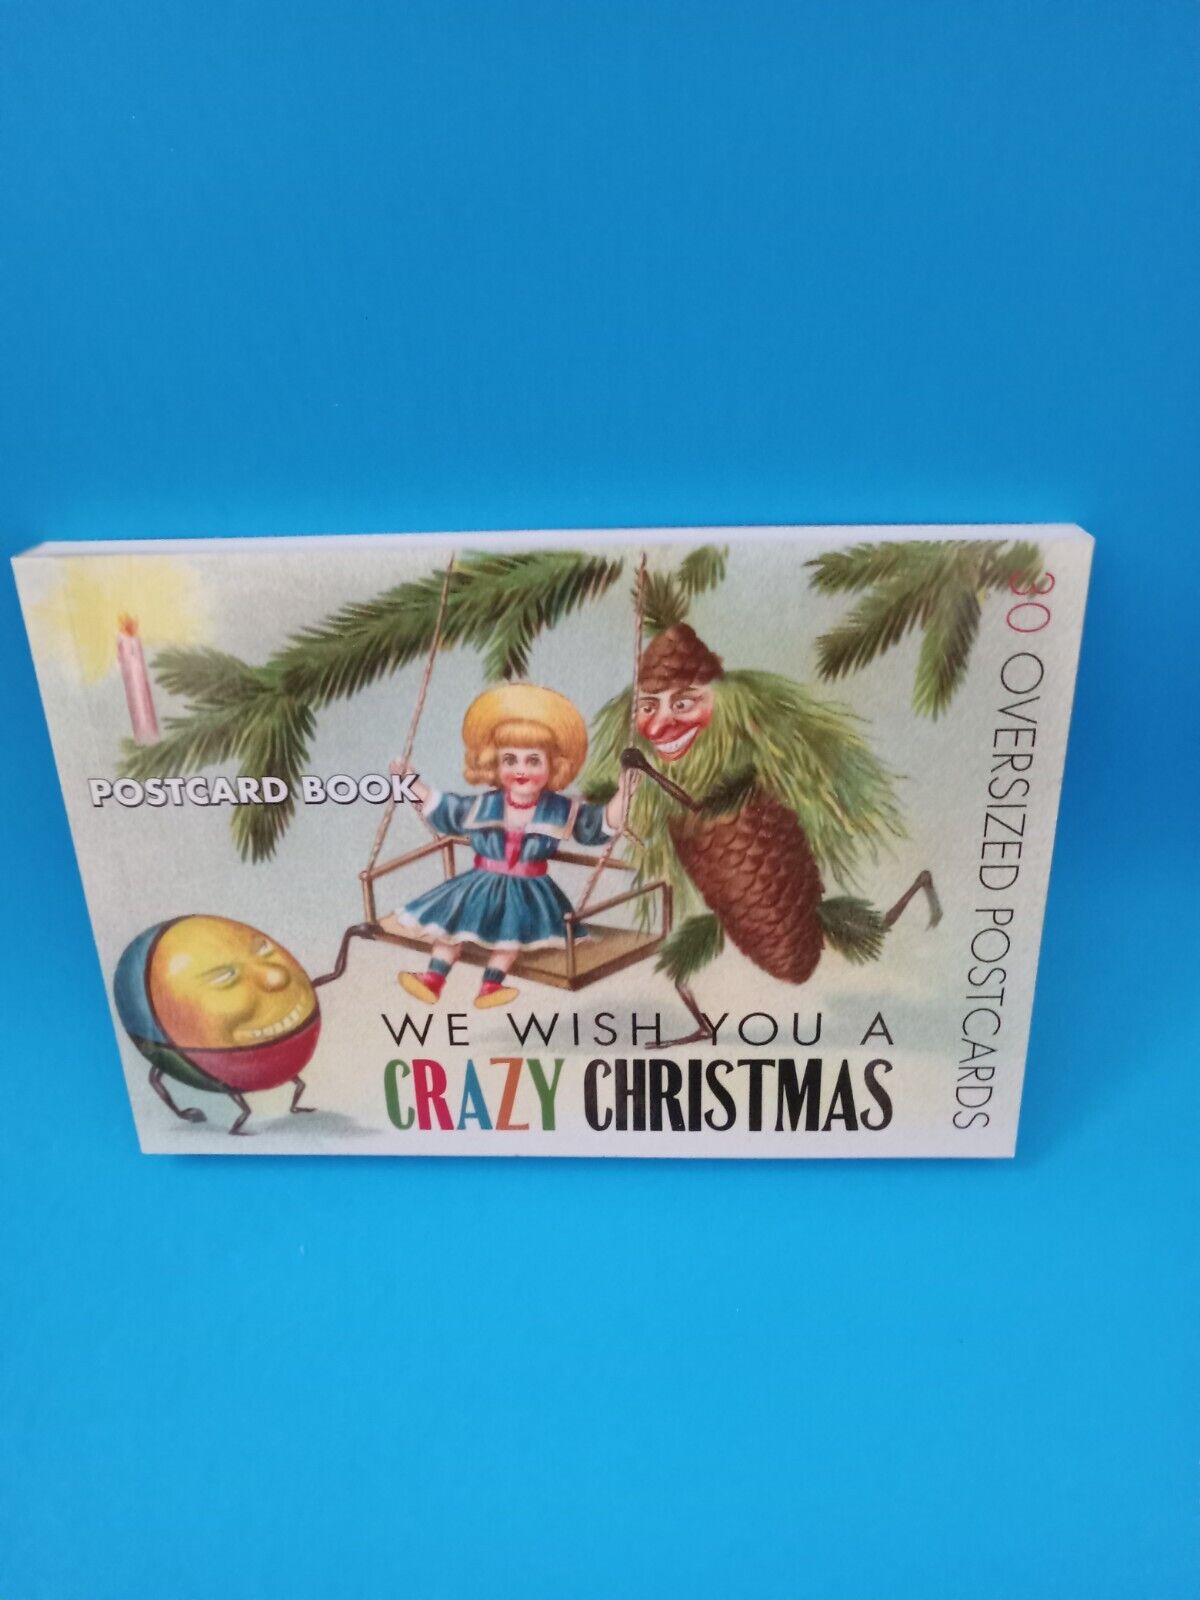  WE WISH YOU A CRAZY CHRISTMAS 30 Oversized Postcards Book New Old Stock 2011